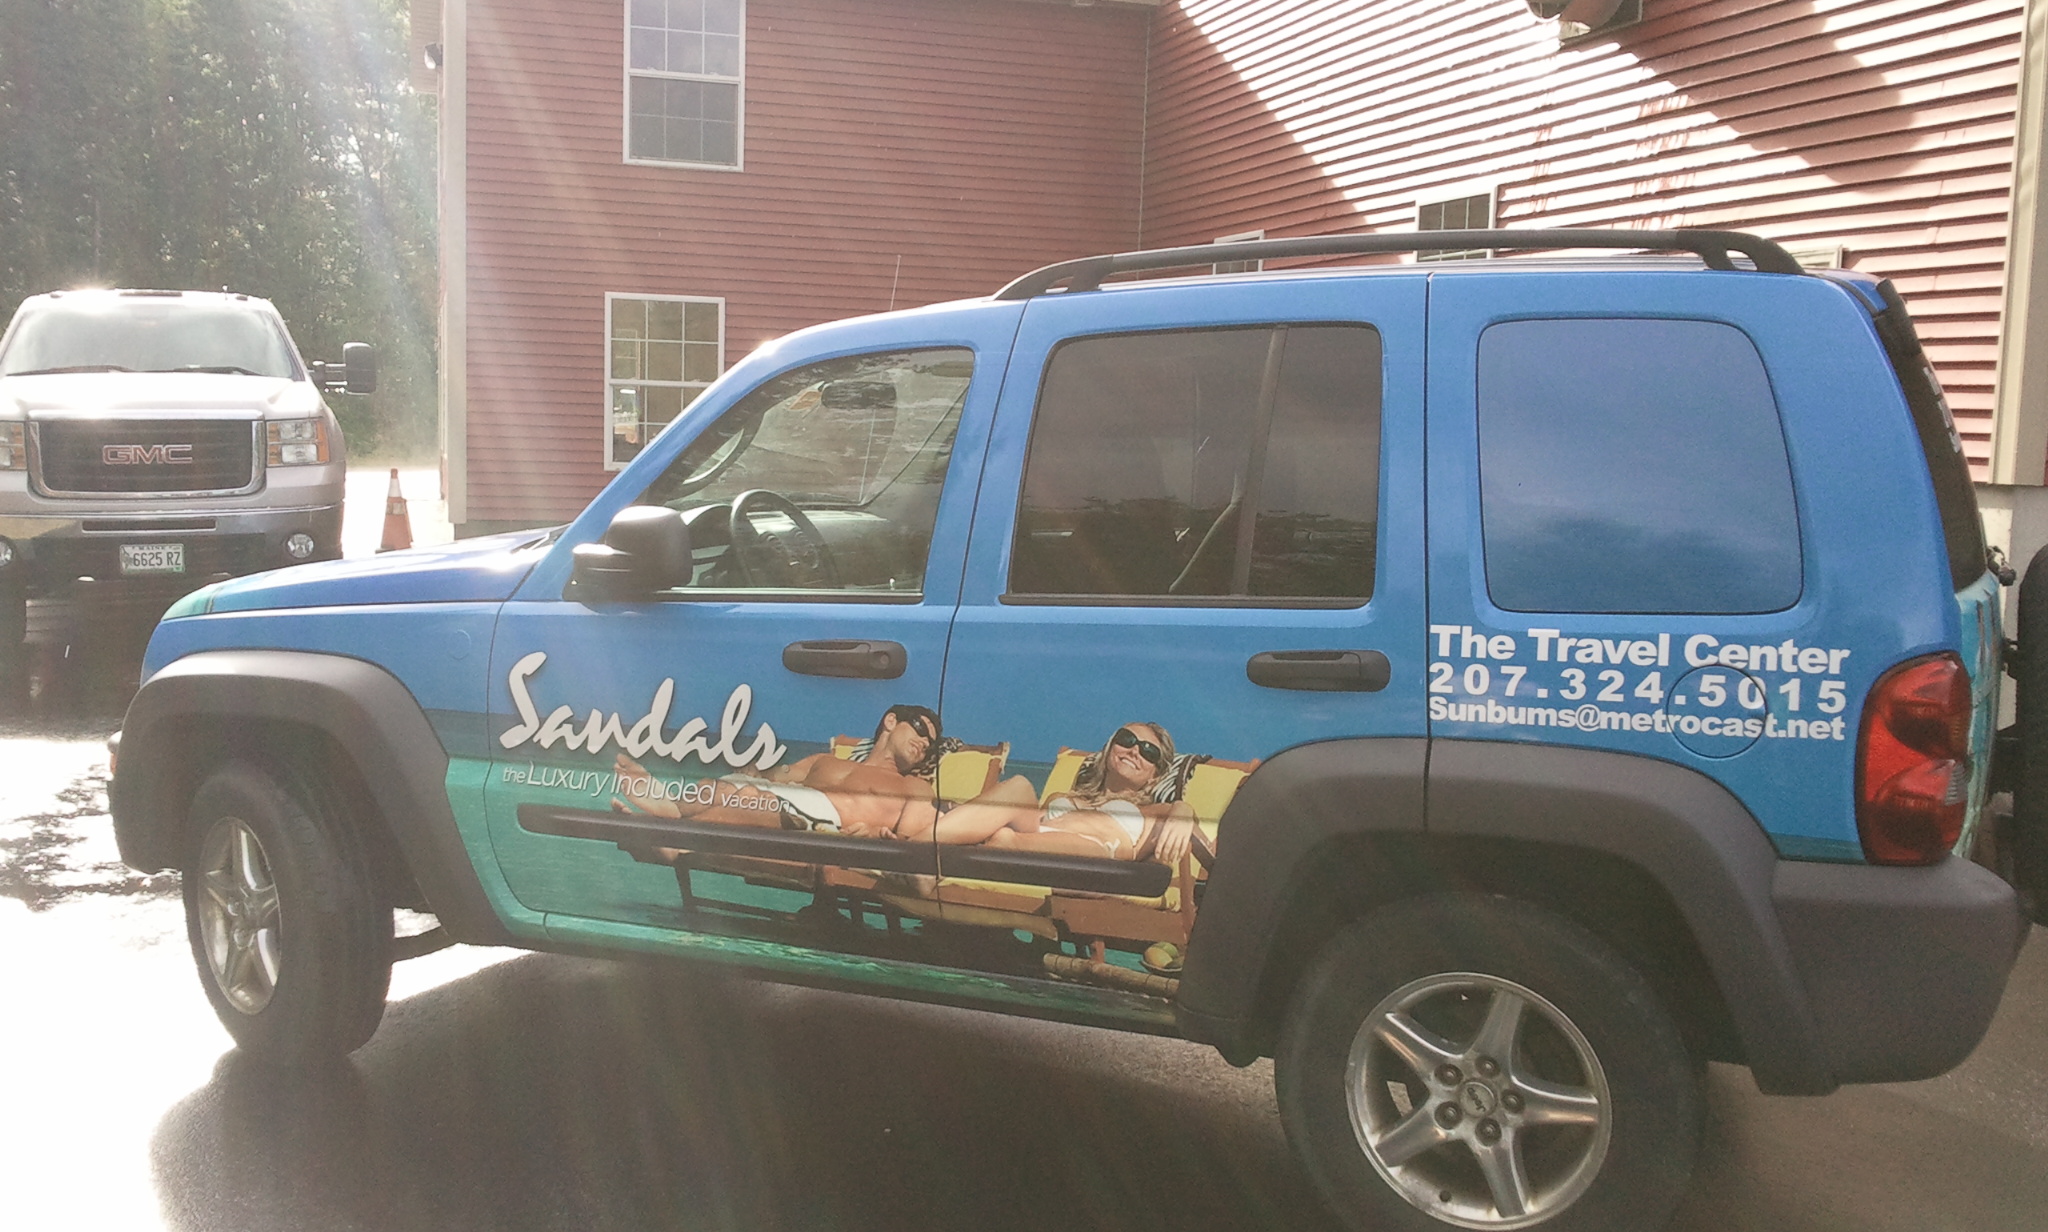 full vehicle wrap for sanford maine business by lake graphics